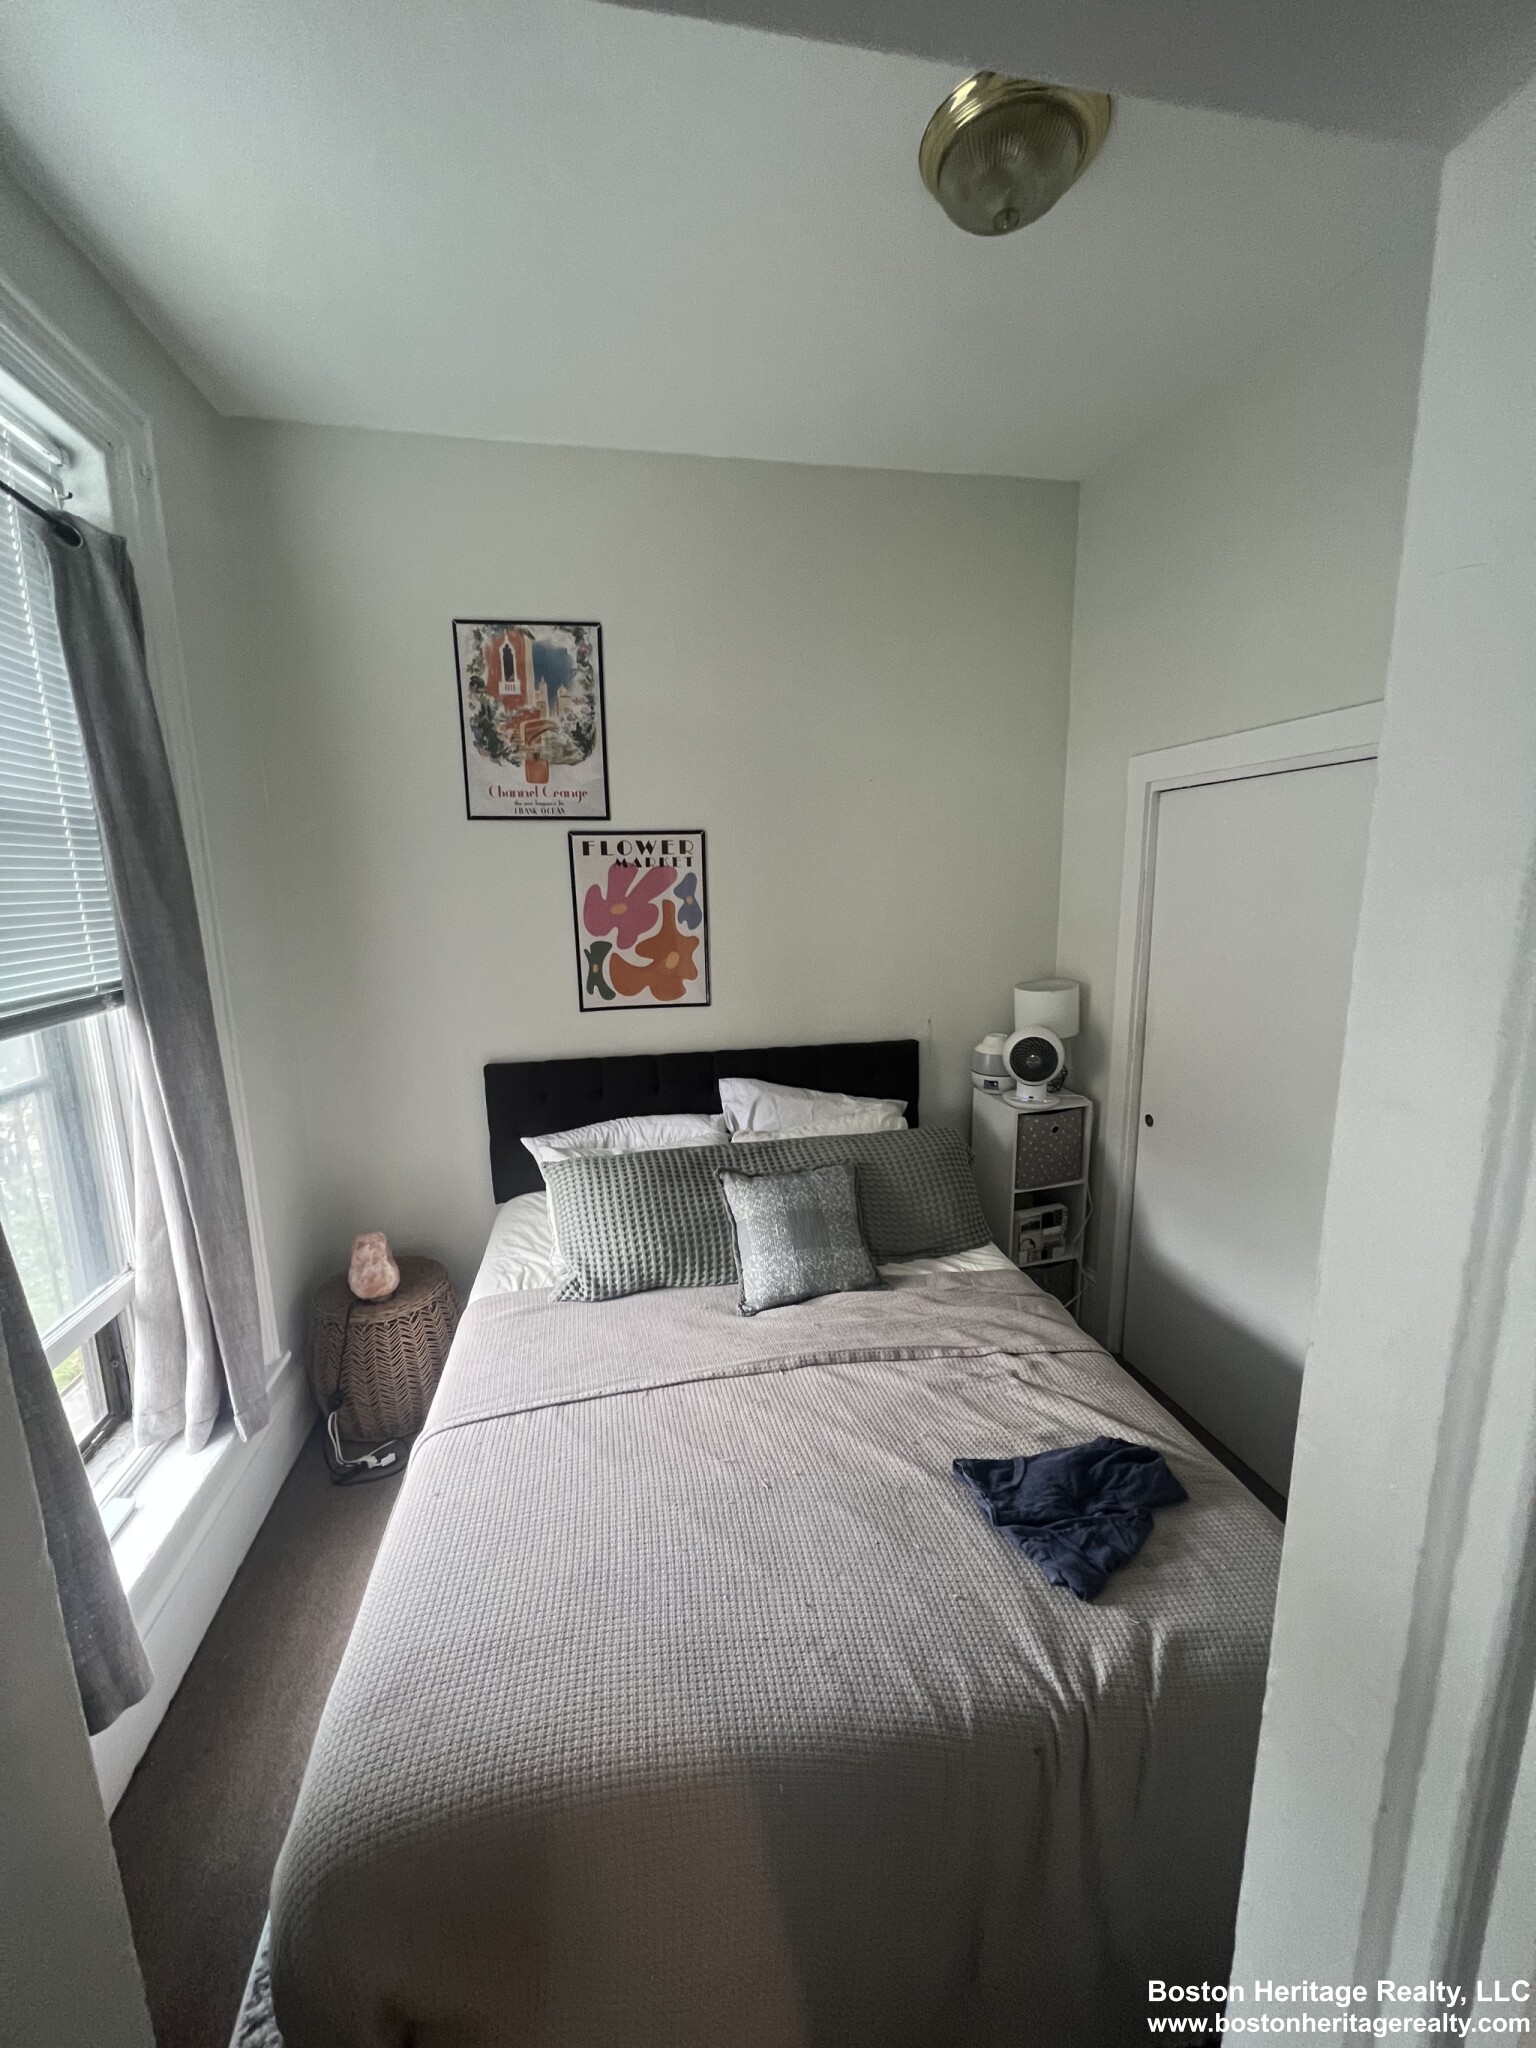 1 Bed, 1 Bath apartment in Boston, South End for $2,450